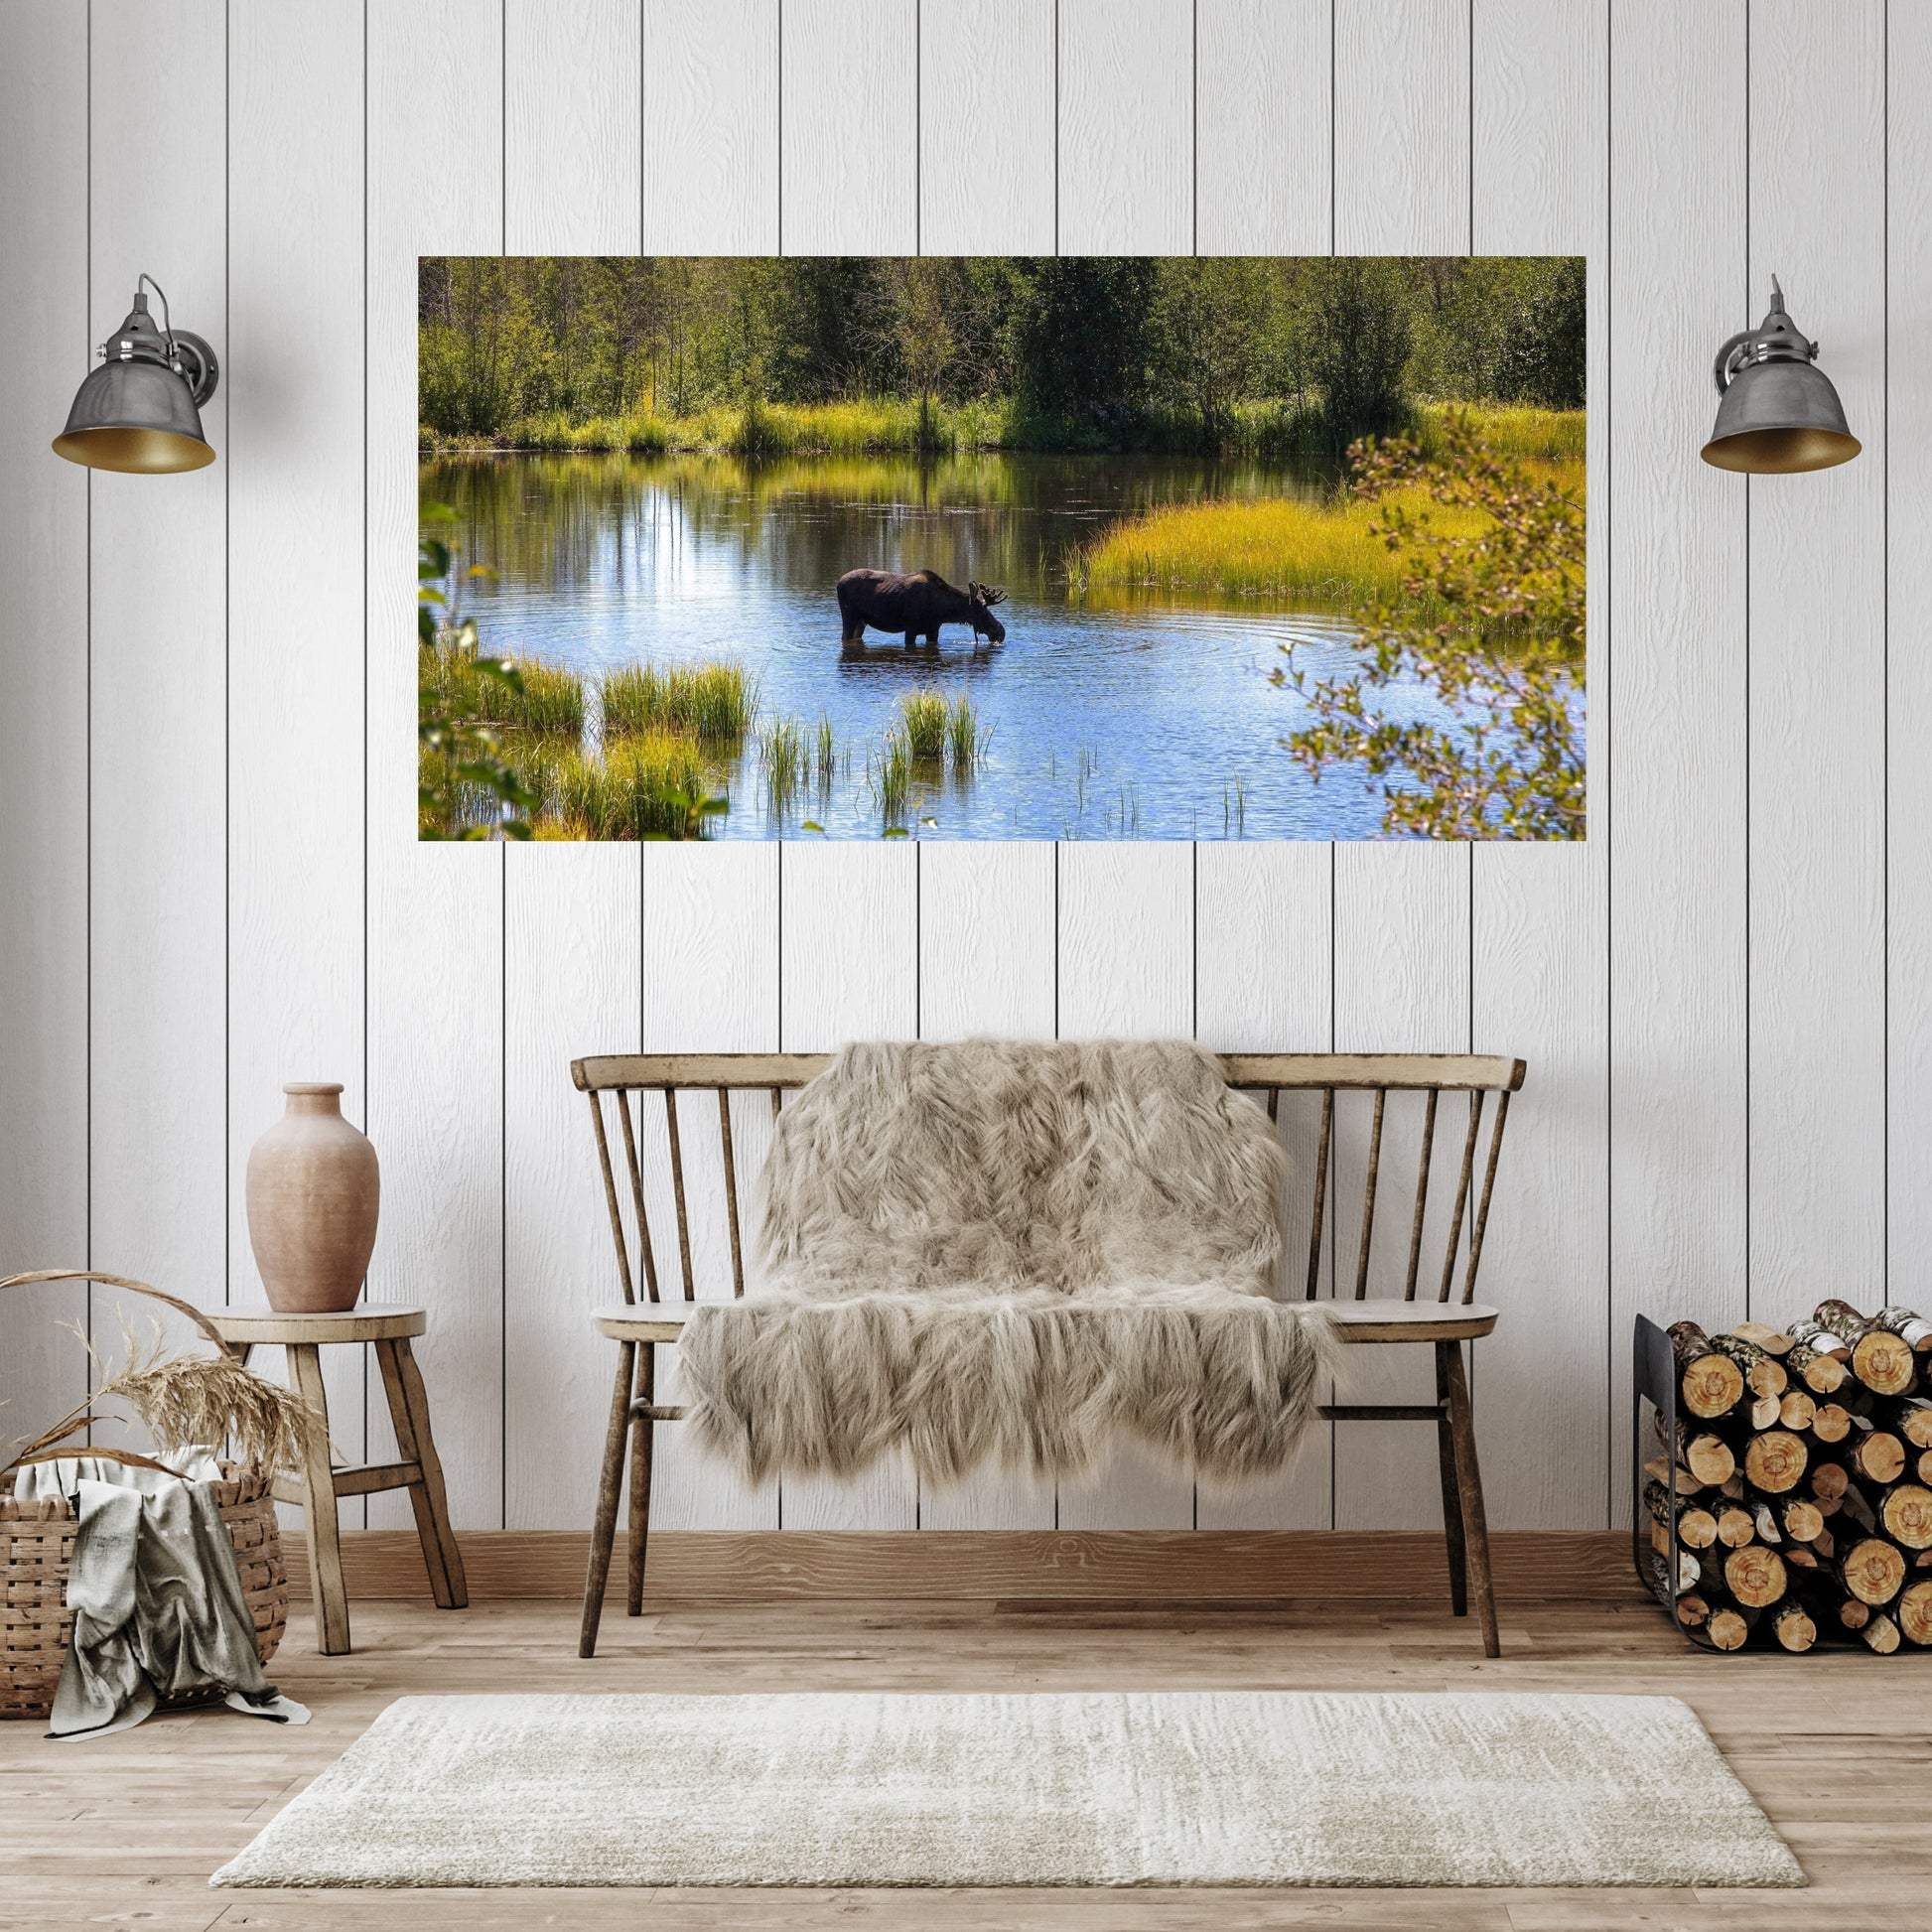 large acrylic metal picture of moose drinking water in wyoming hanging above farmhouse themed wooden bench